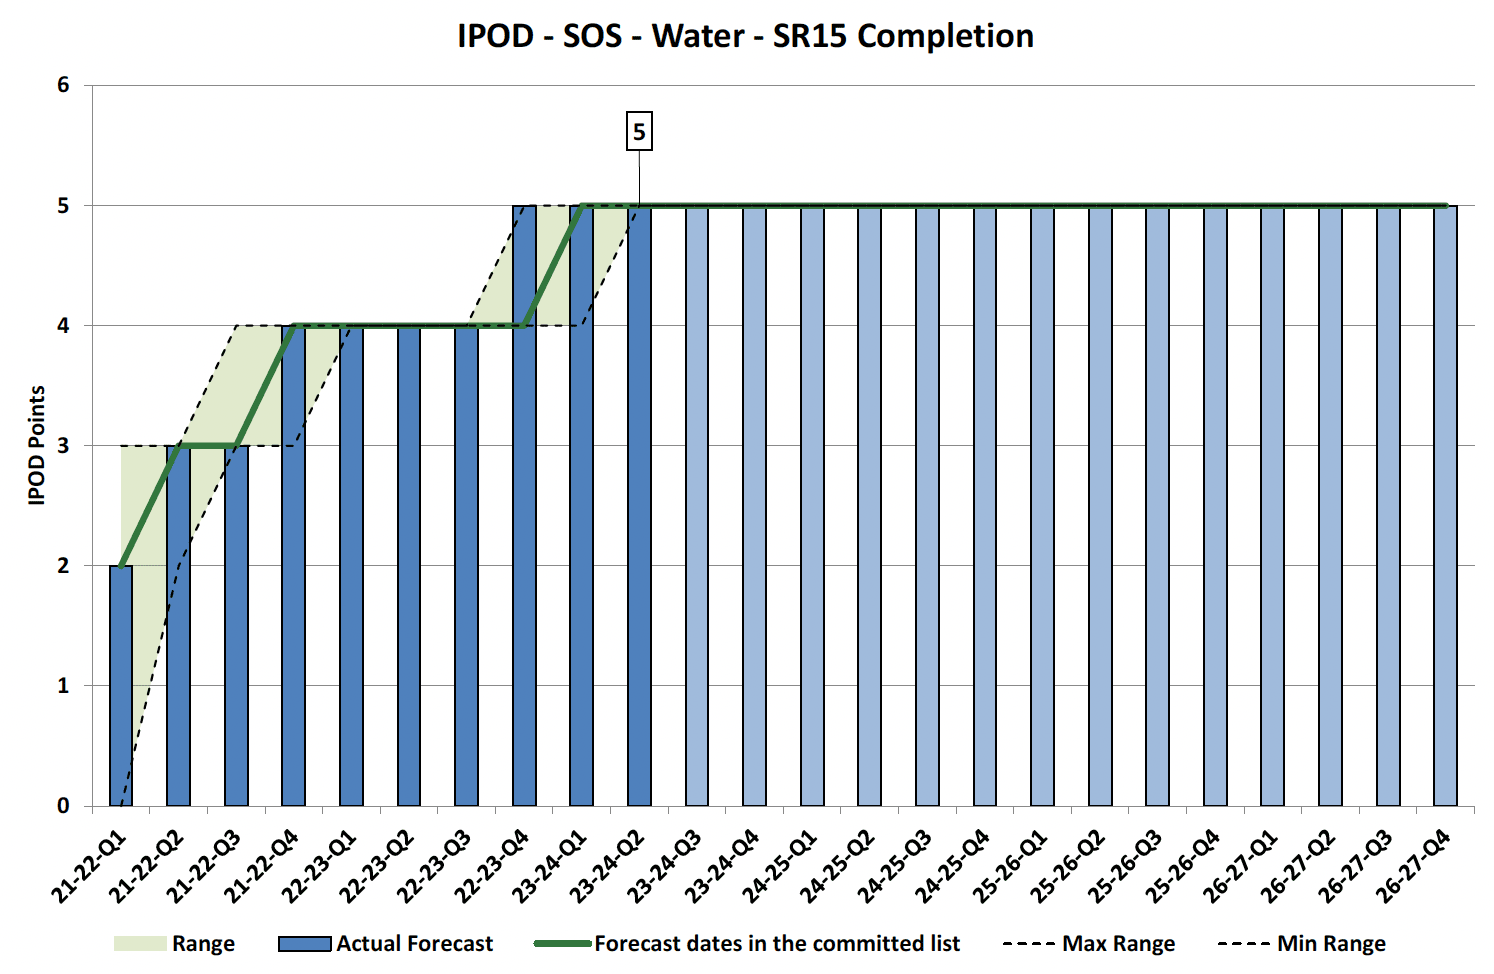 Chart showing IPOD points achieved or forecast for Start on Site milestone against target range for SR15 Completion Projects in Water Portfolio